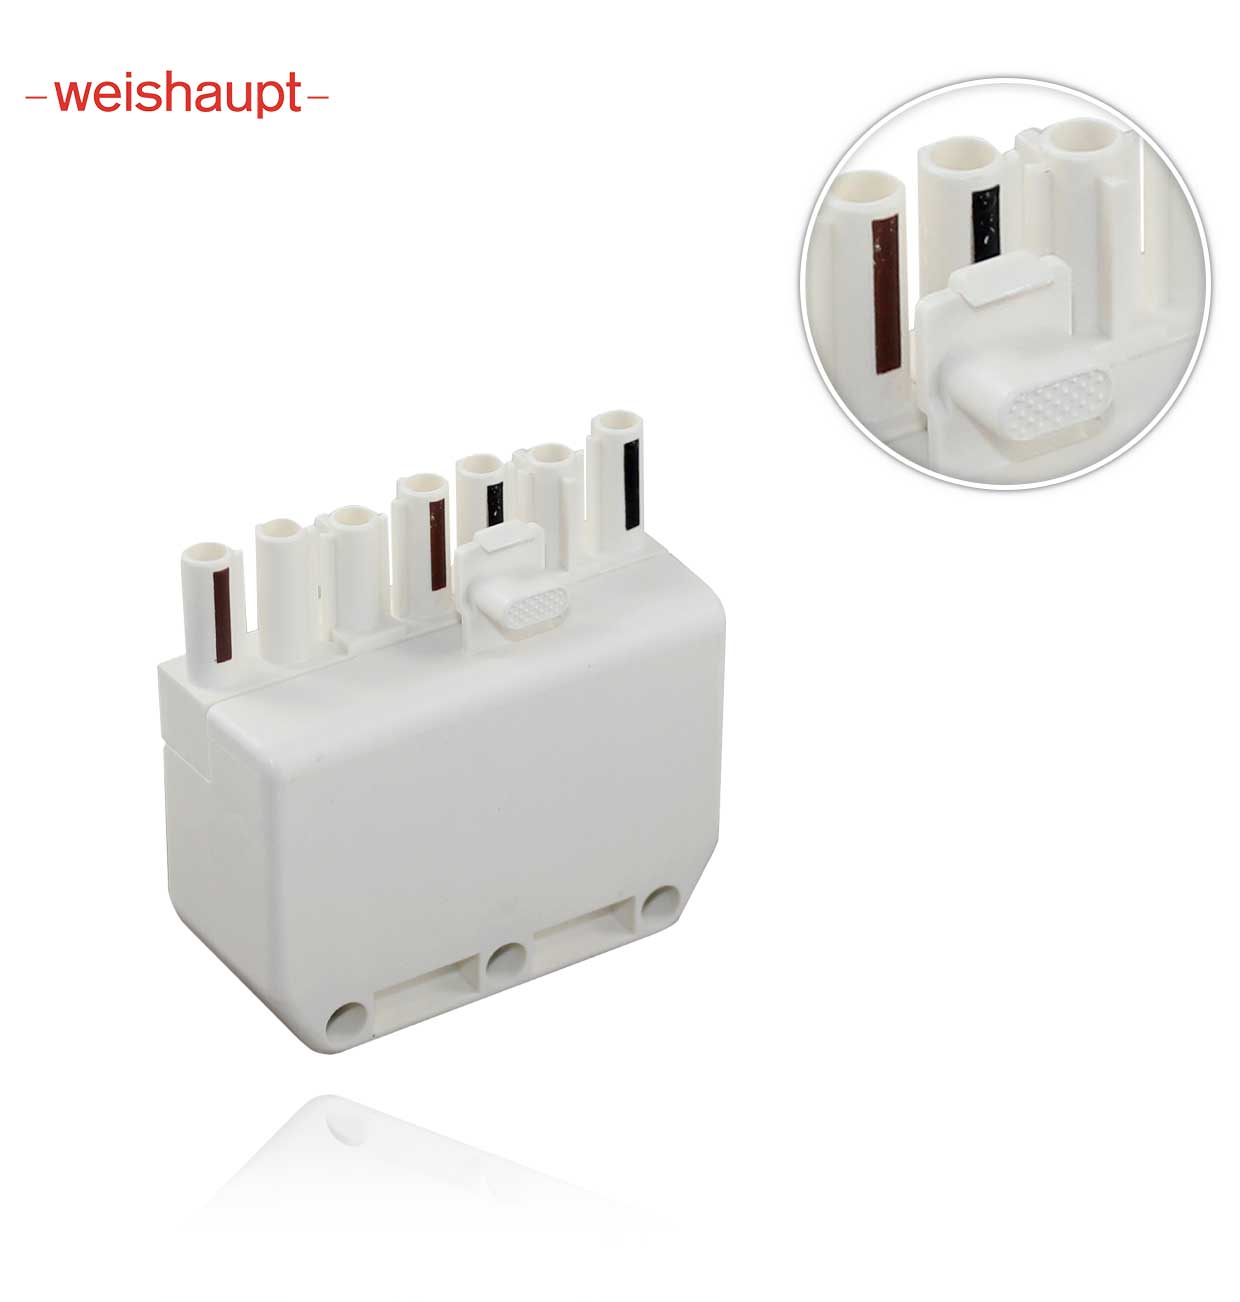 ST 18/7 WEISHAUPT MALE CONNECTOR